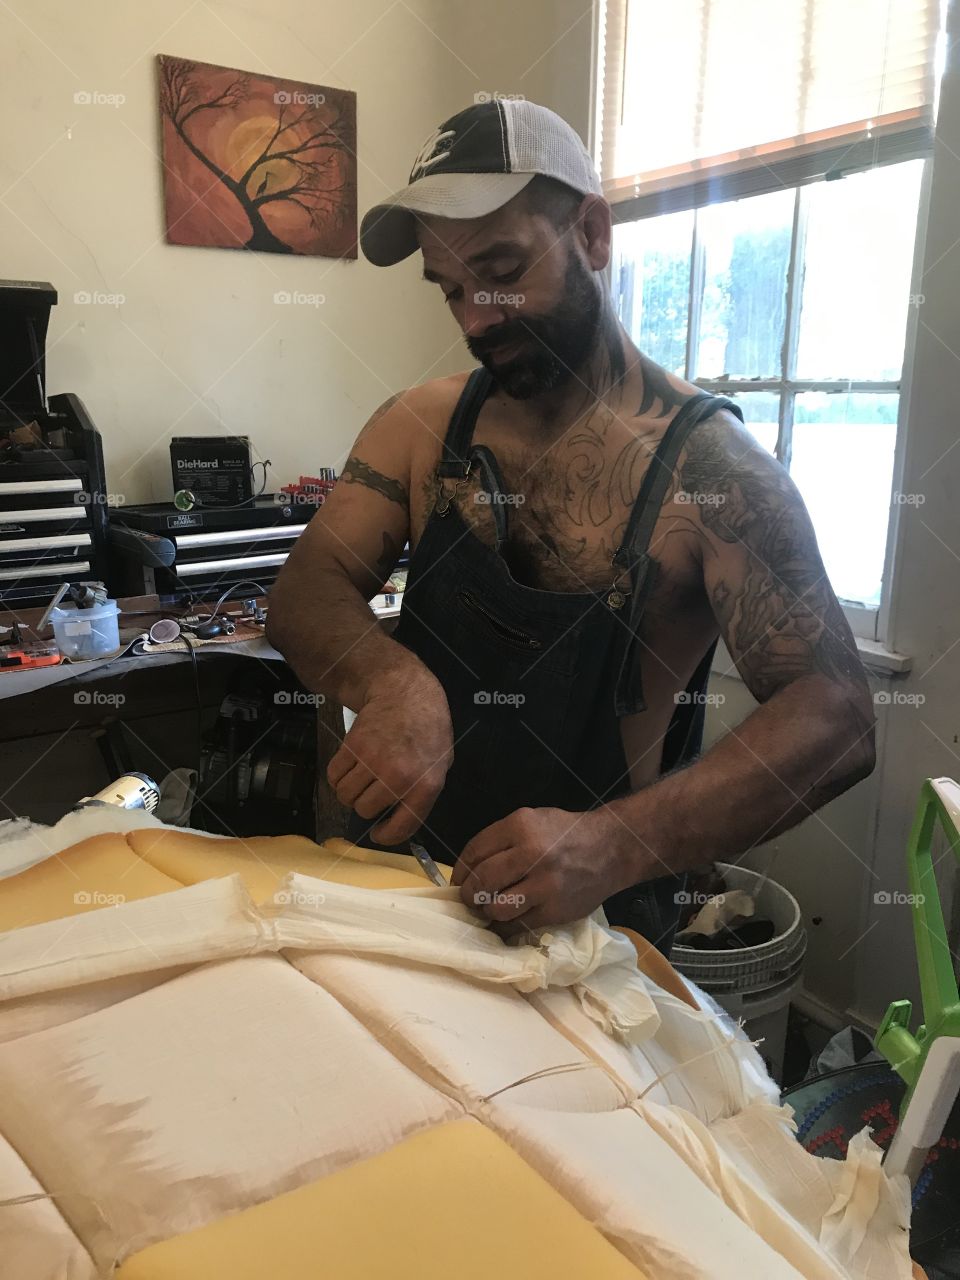 Man working on reupholstering chase lounge